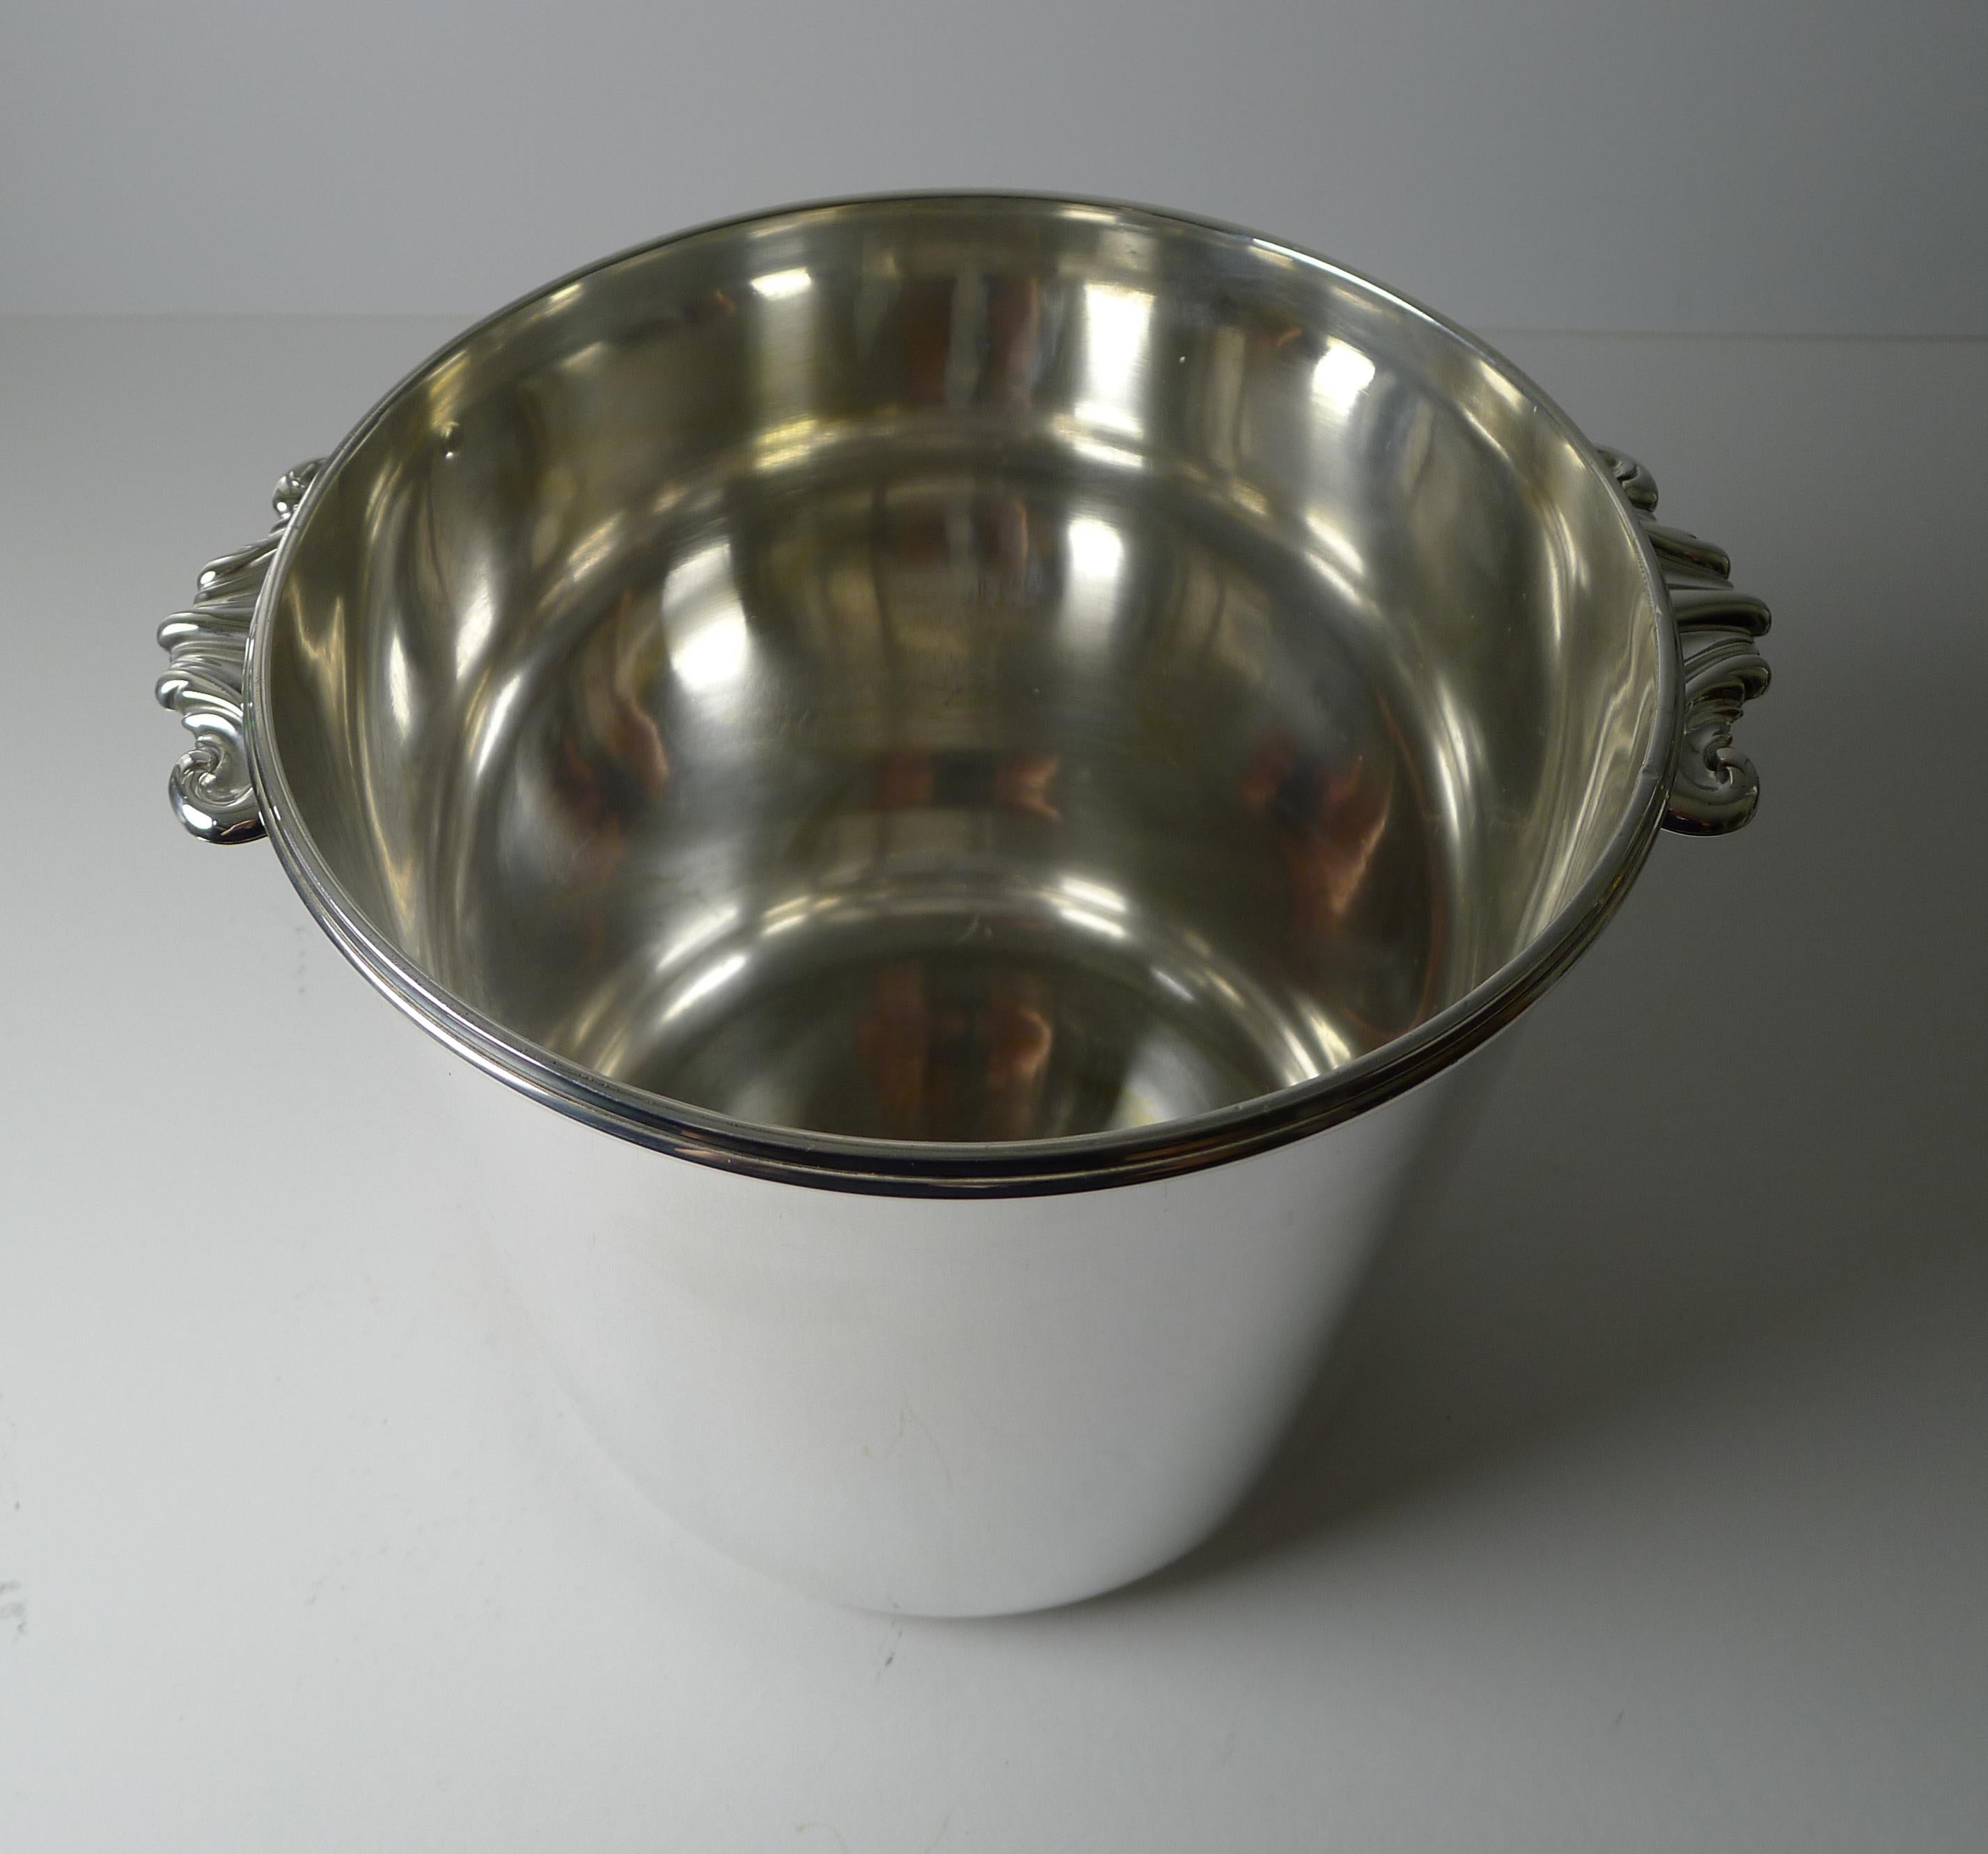 Vintage French Silver Plated Wine or Champagne Cooler / Bucket, Puiforcat For Sale 1